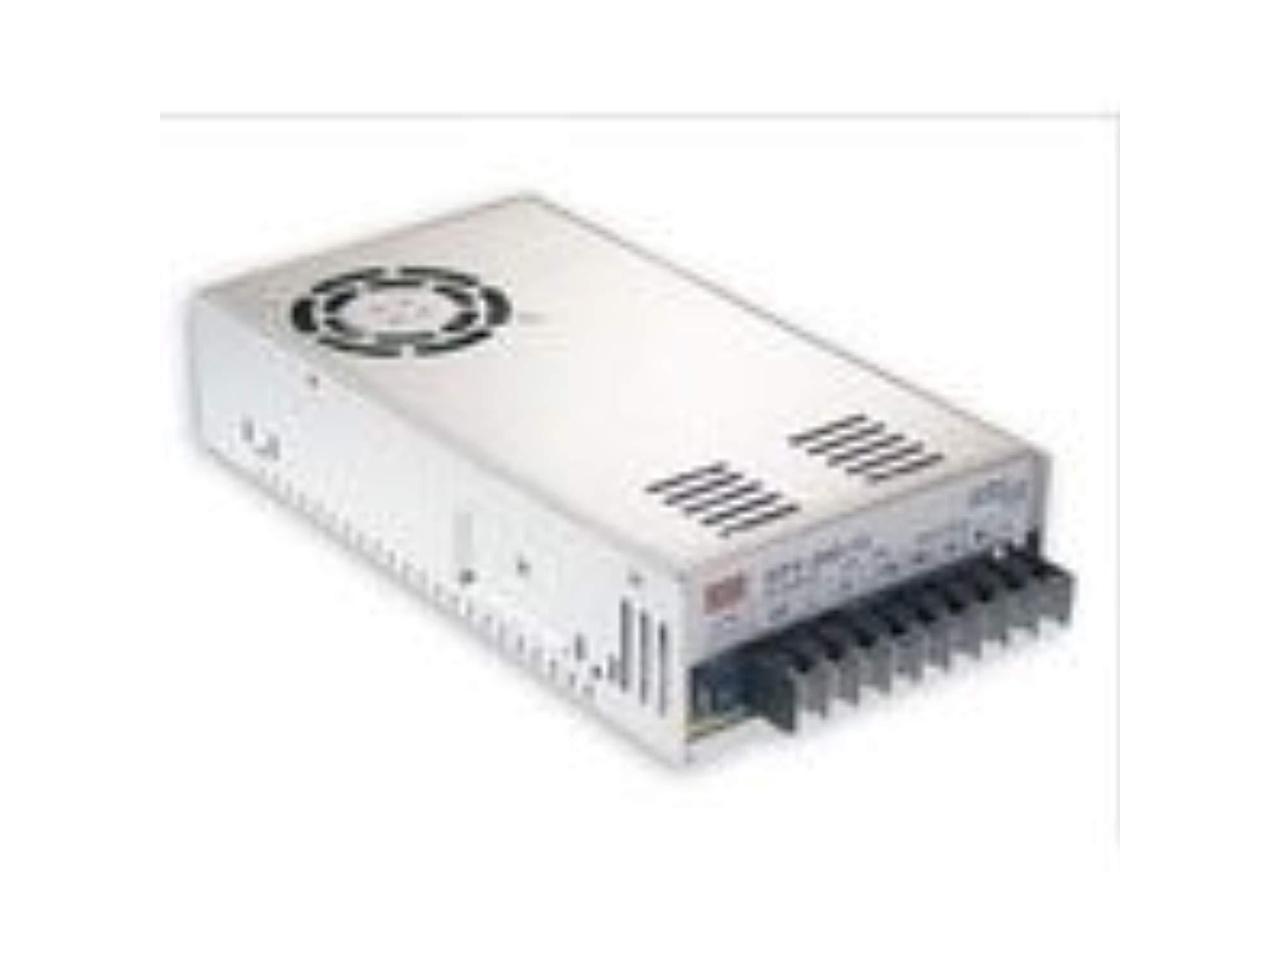 PowerNex Mean Well Gst160a48-r7b 48v 3.34a 160w Industrial Adaptor for sale online 